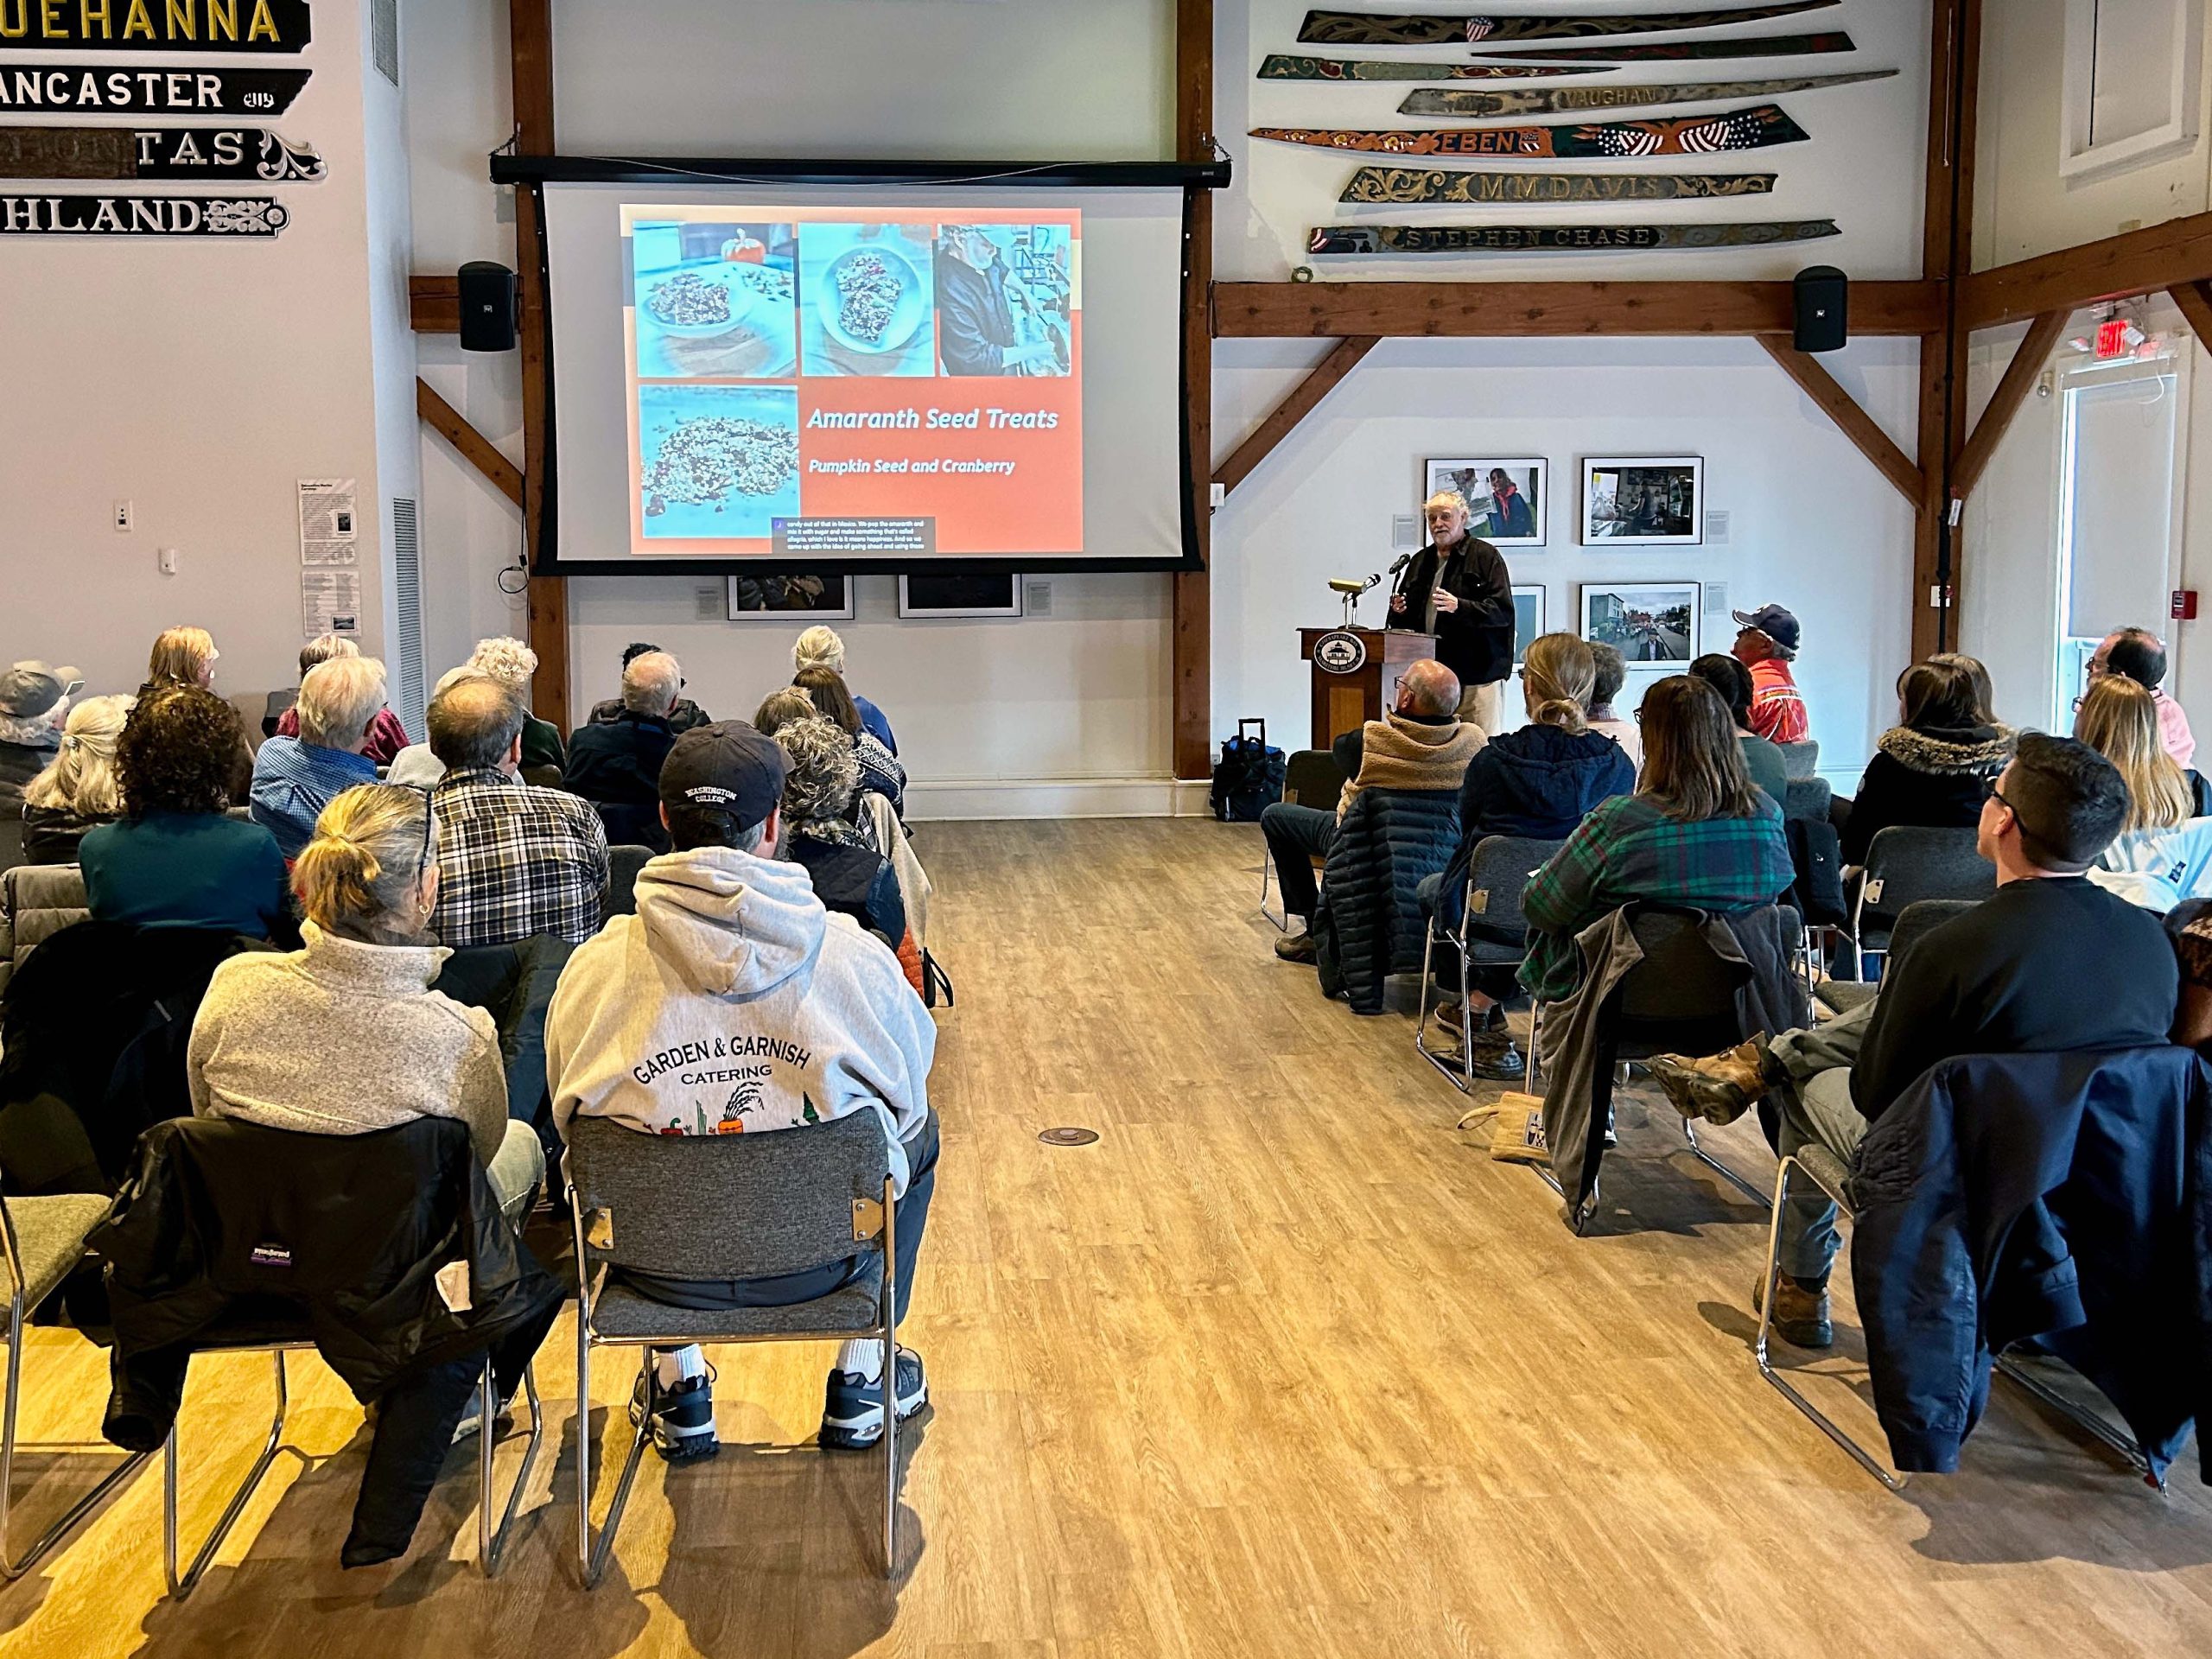 CBMM’s upcoming Speaker Event schedule features six events that will be hosted in the Van Lennep Auditorium and also available virtually, including programming built around CBMM’s special exhibitions The Changing Chesapeake and Her Helm.